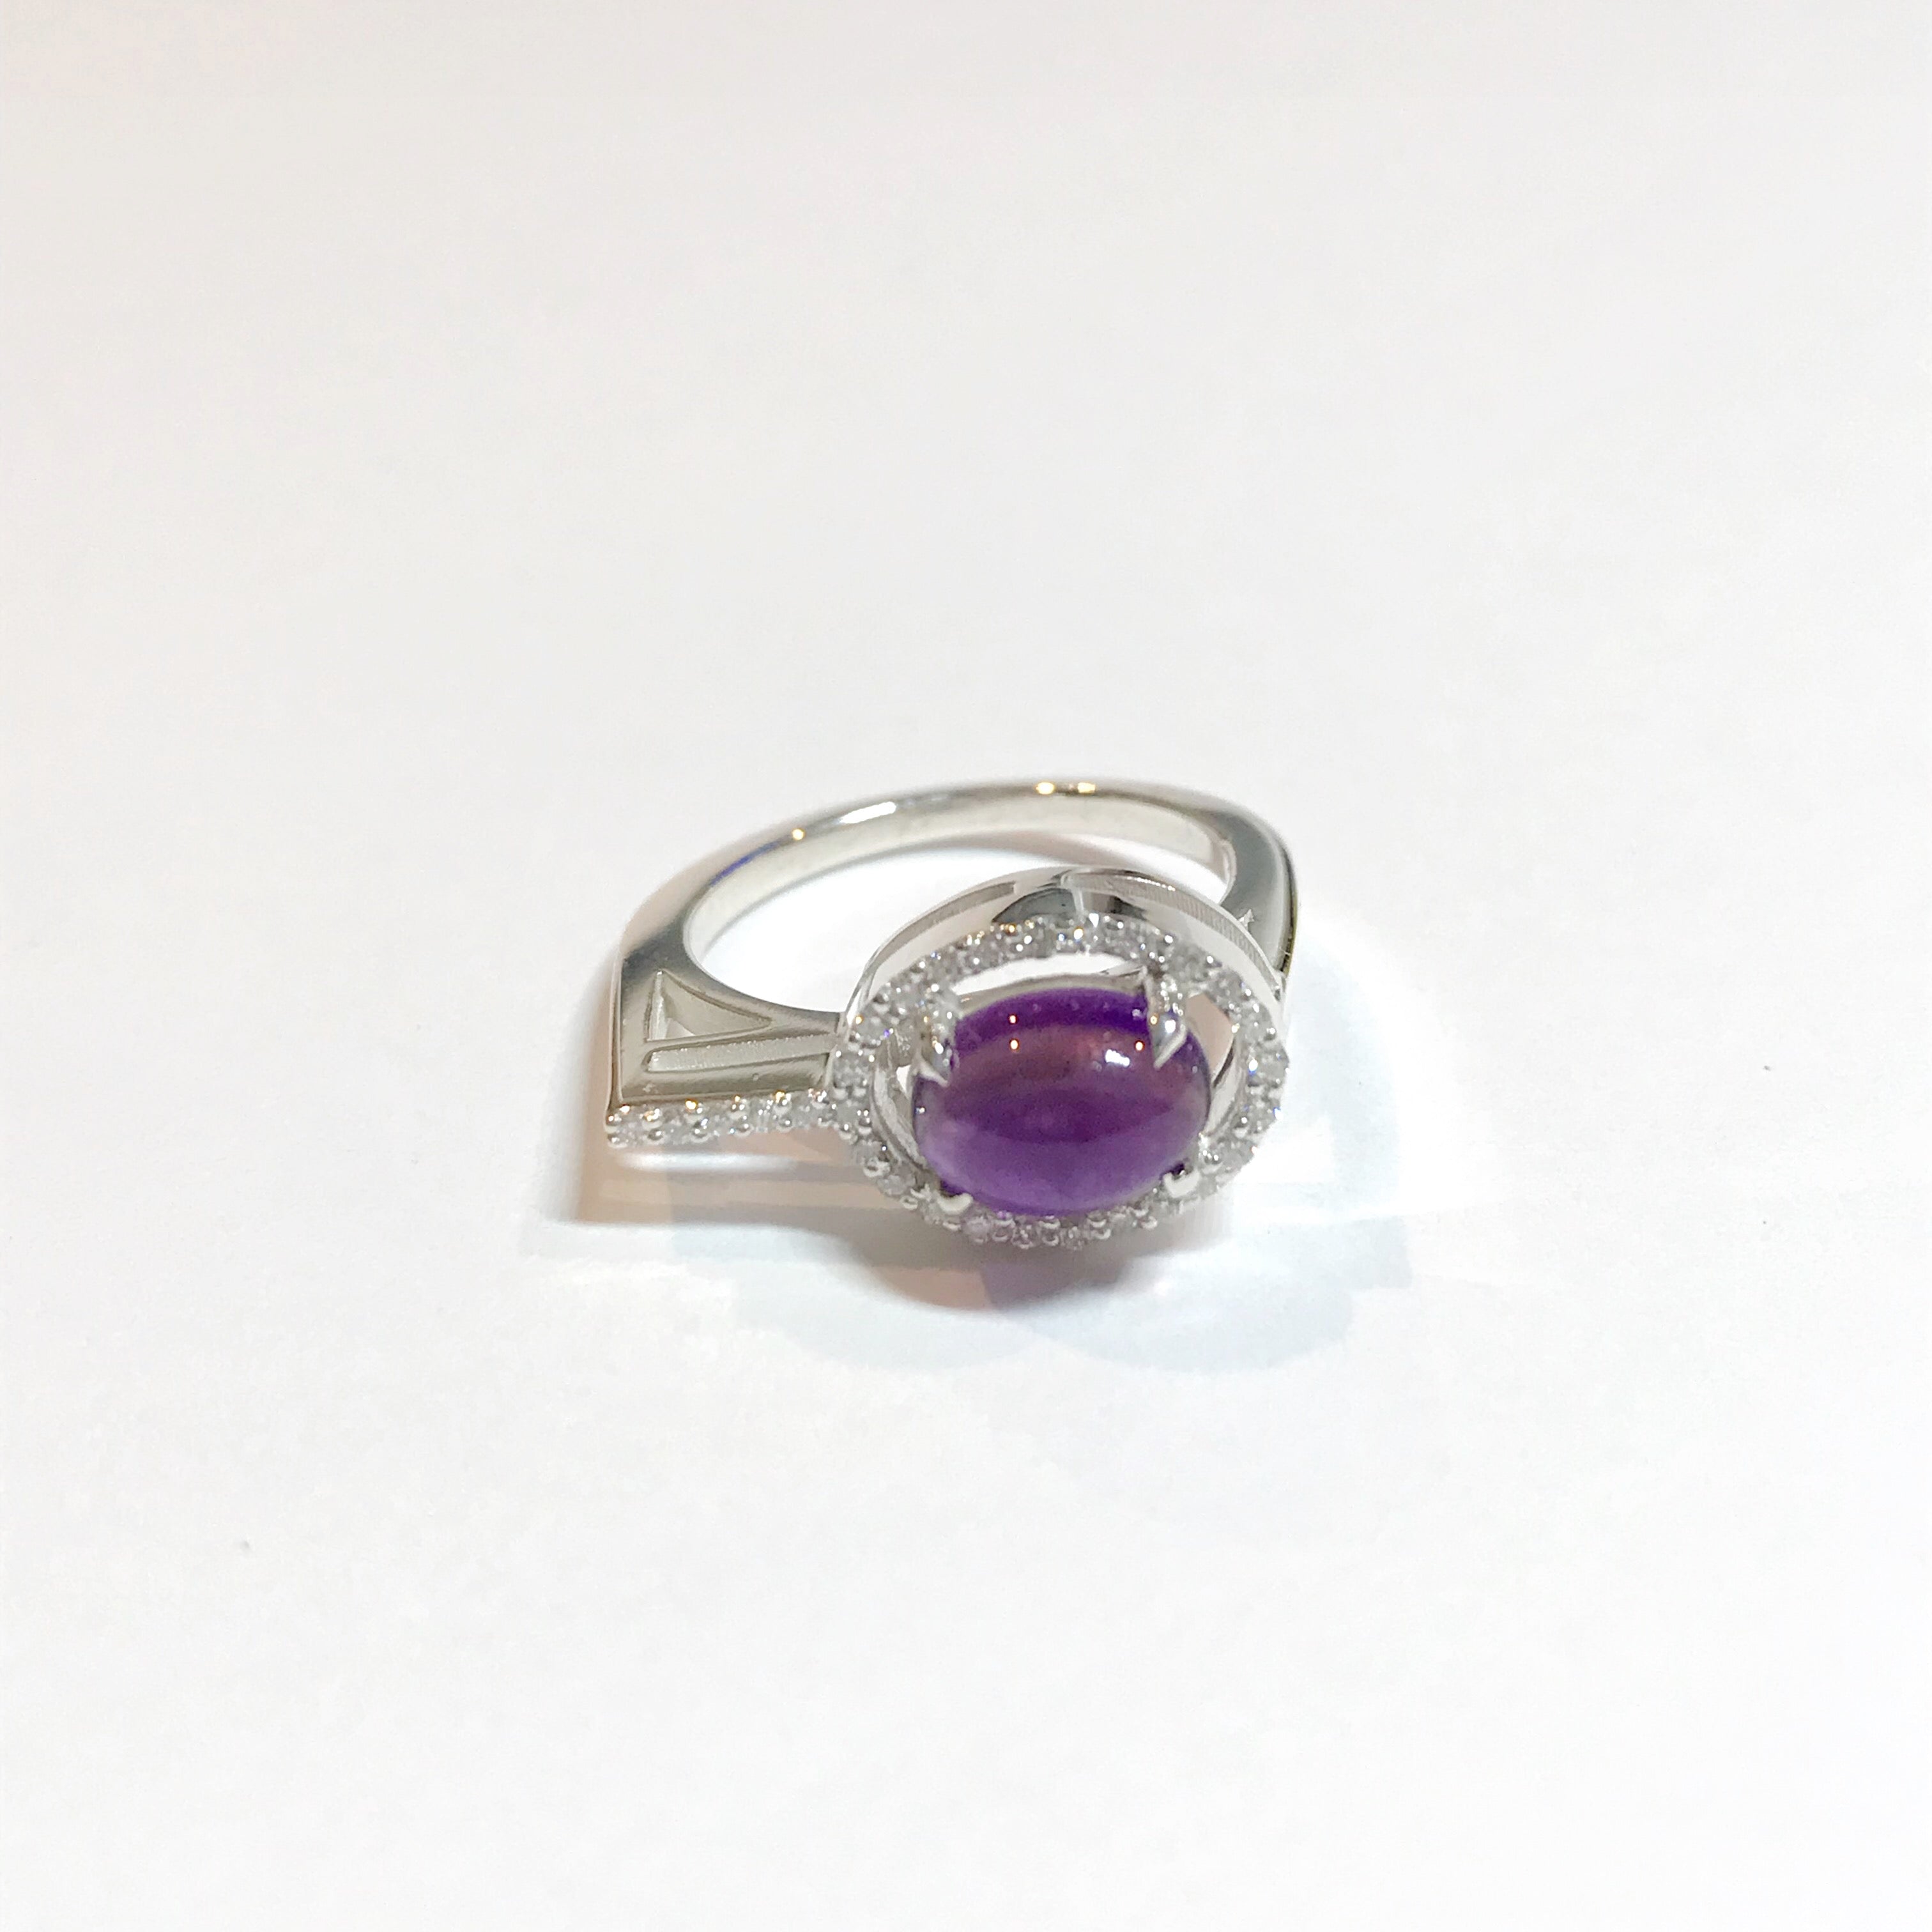 Irini gem drop white diamond and cabachon ring set, made in nyc, citrine and amethyst stones